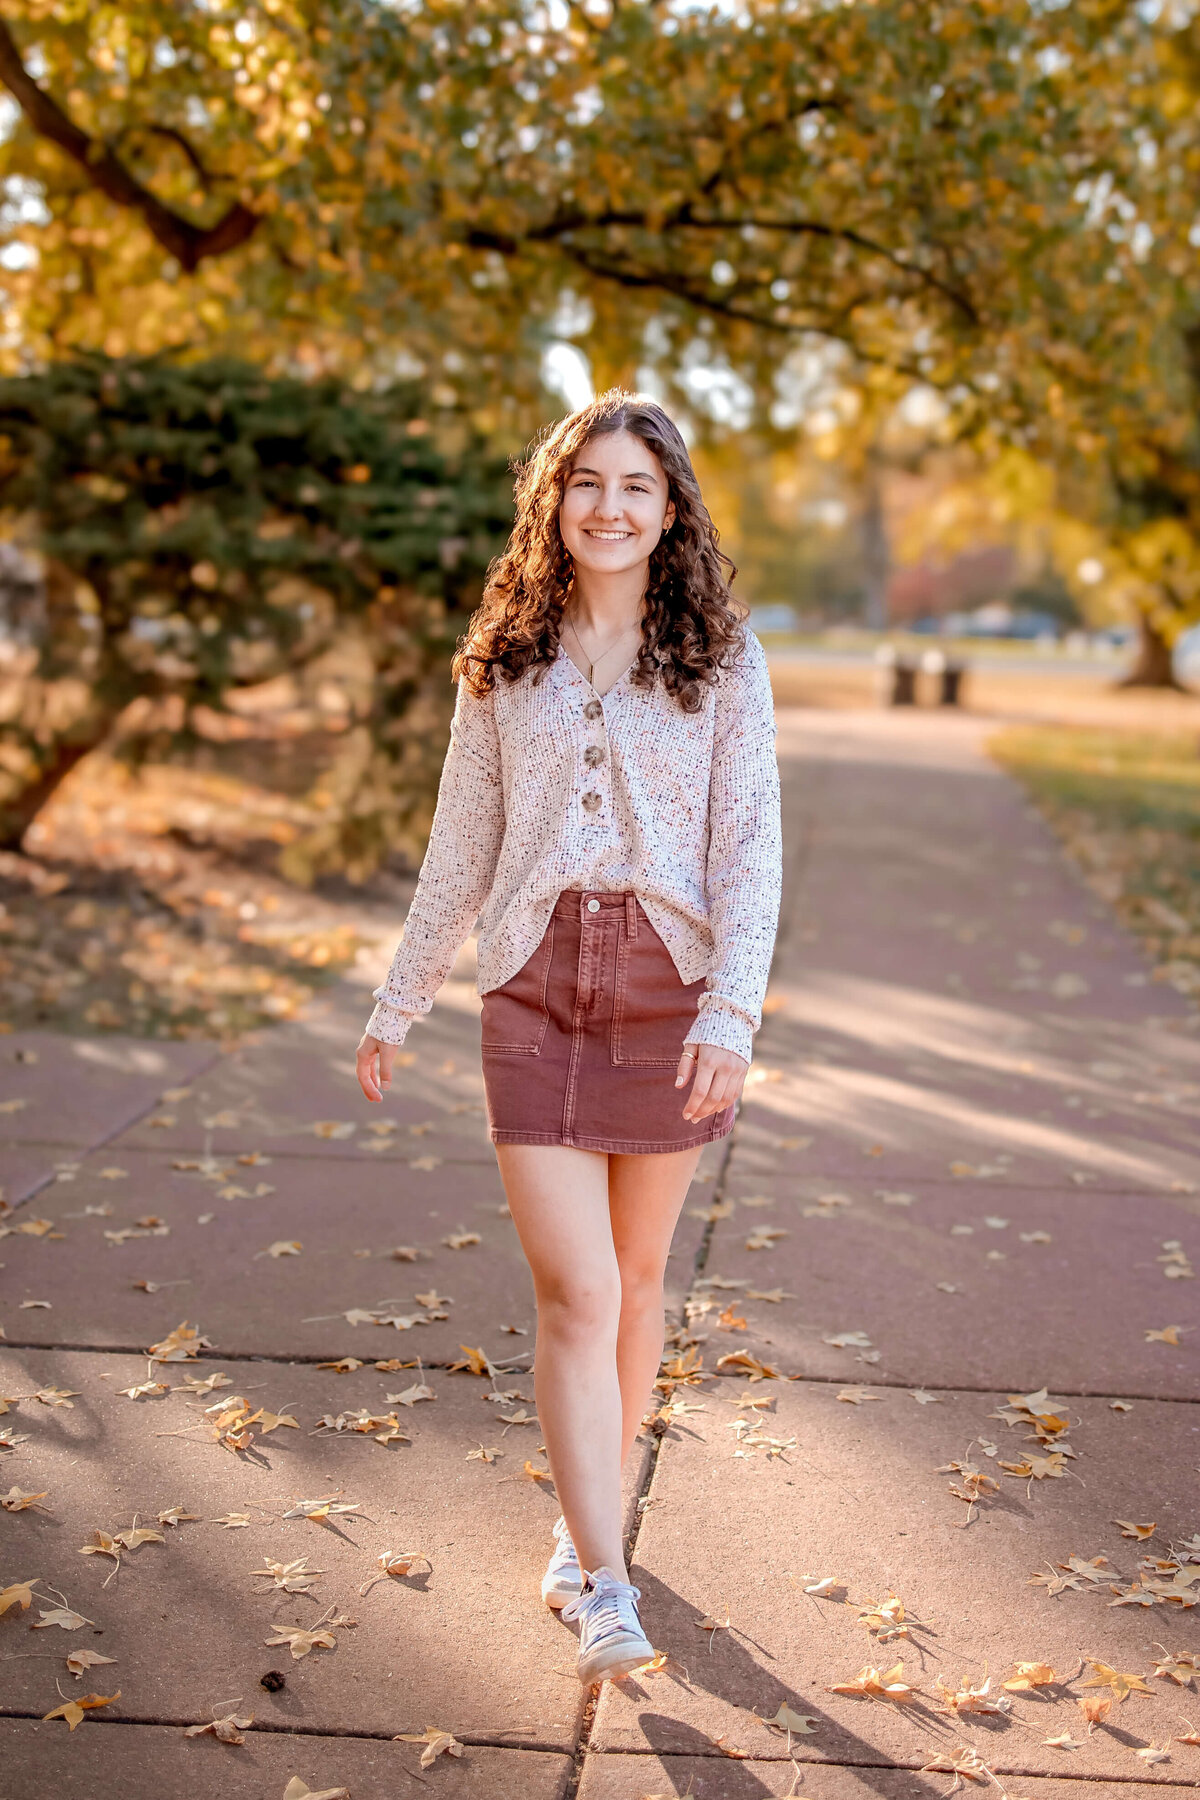 A gorgeous young girl is walking towards the camera in a park filled with fall leaves and beautiful colors.